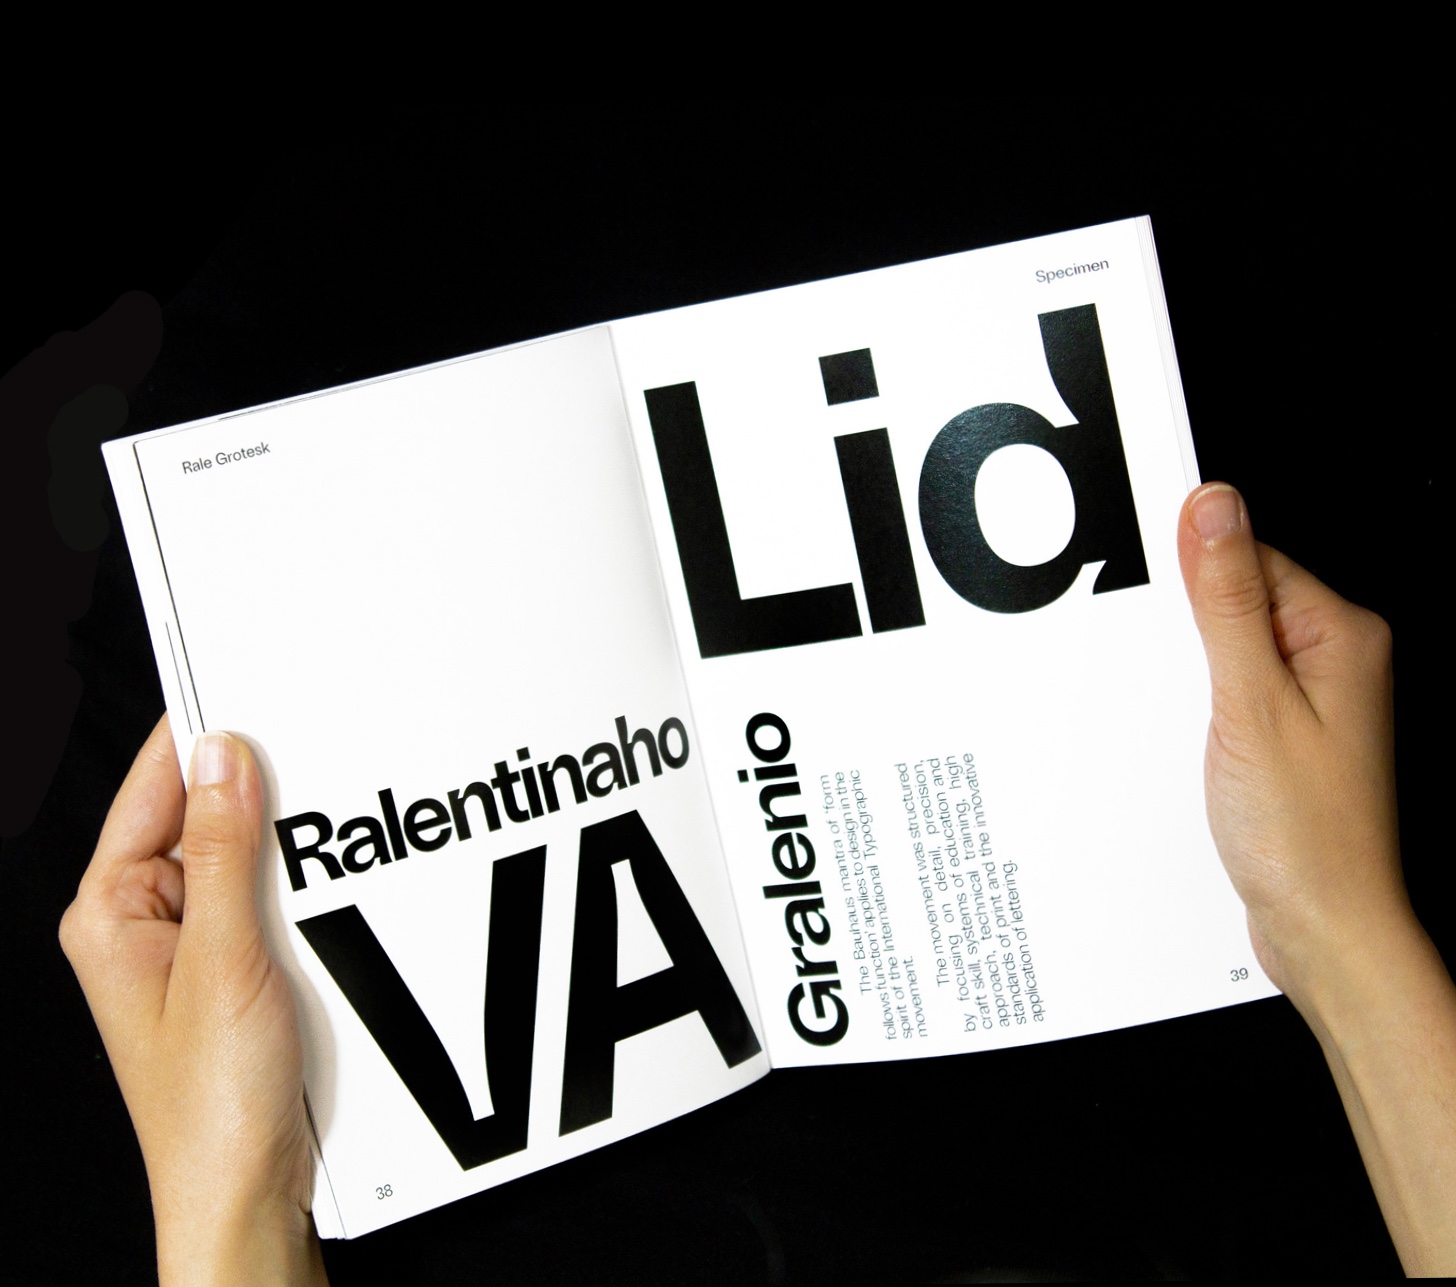 Person hold the specimens book of Rale Grotesk Family